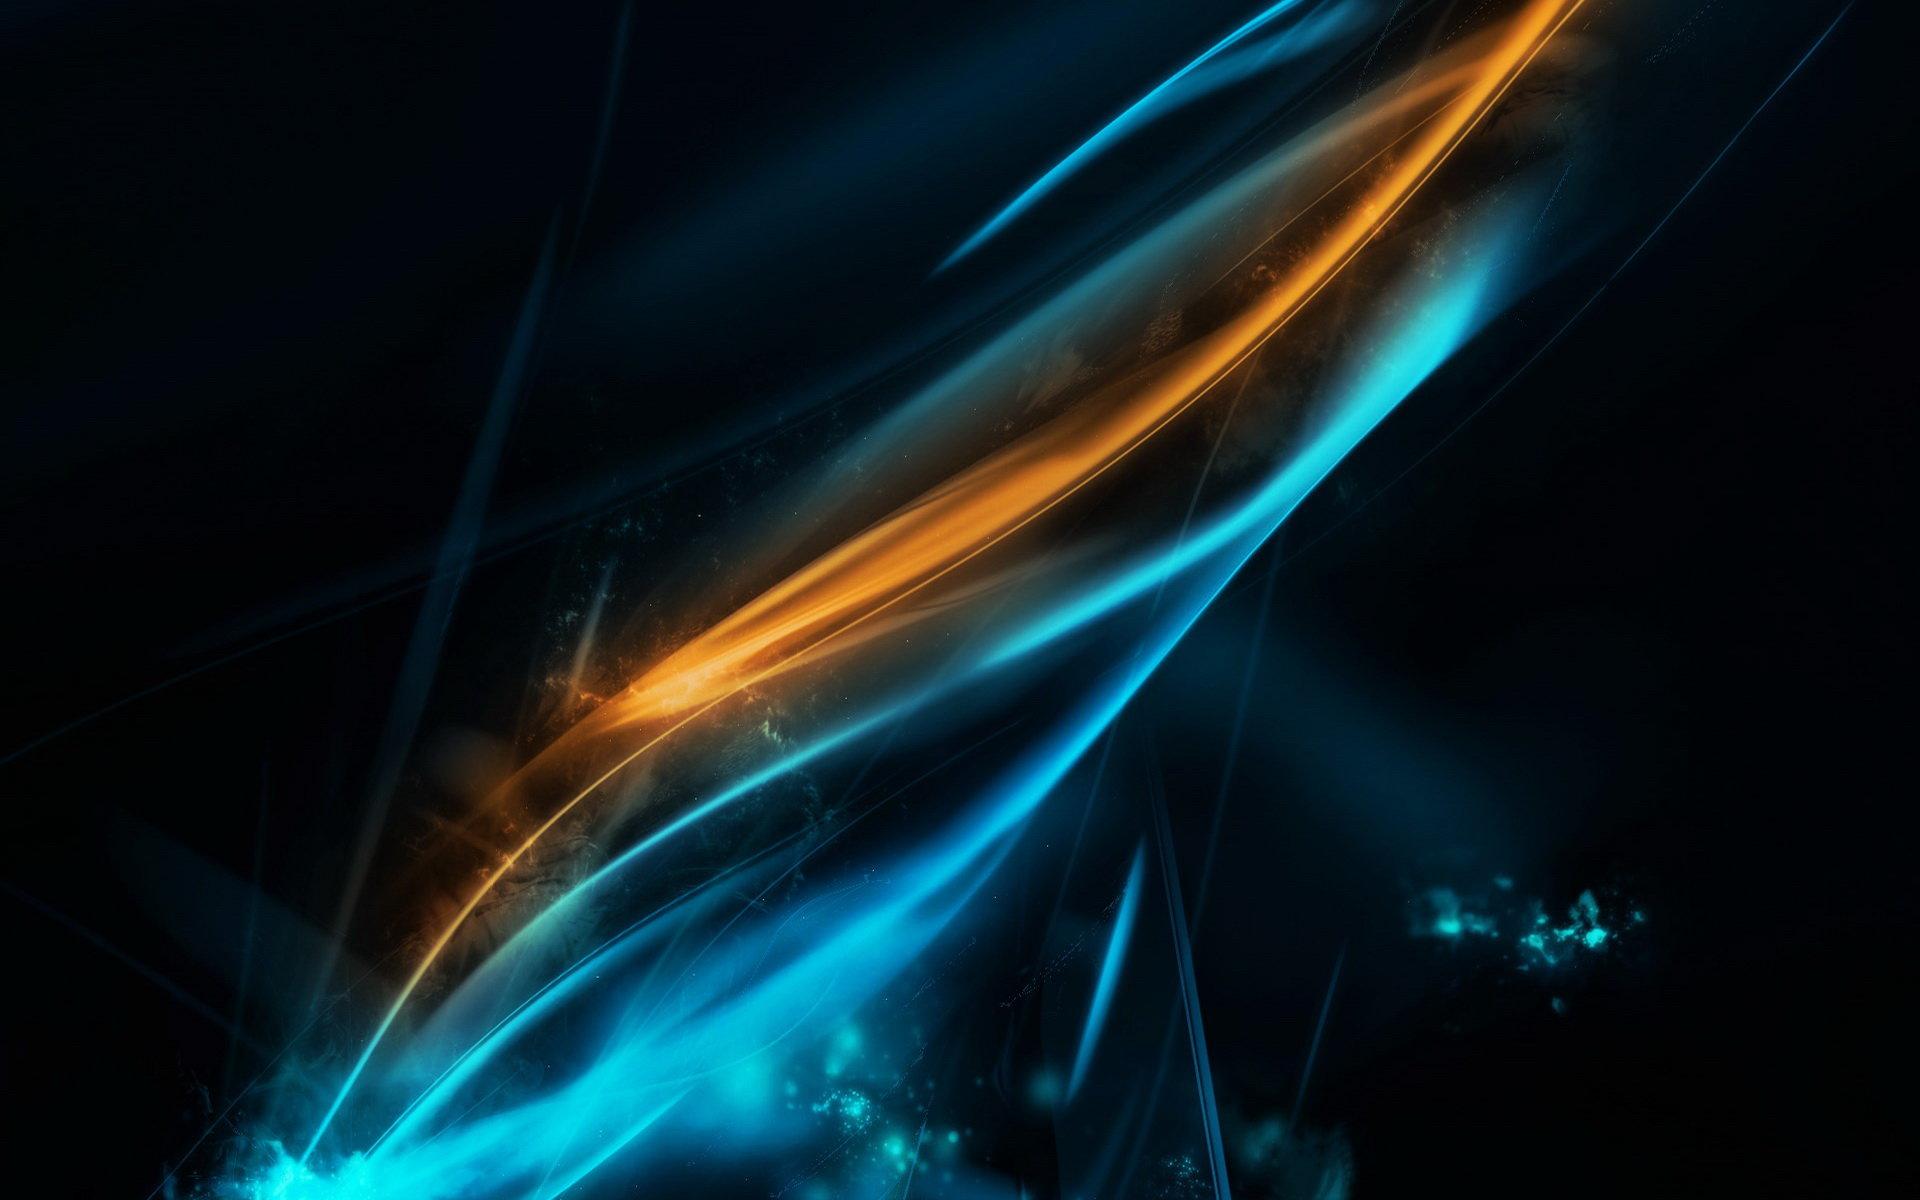 Blue and Orange Abstract Wallpapers - Top Free Blue and Orange Abstract